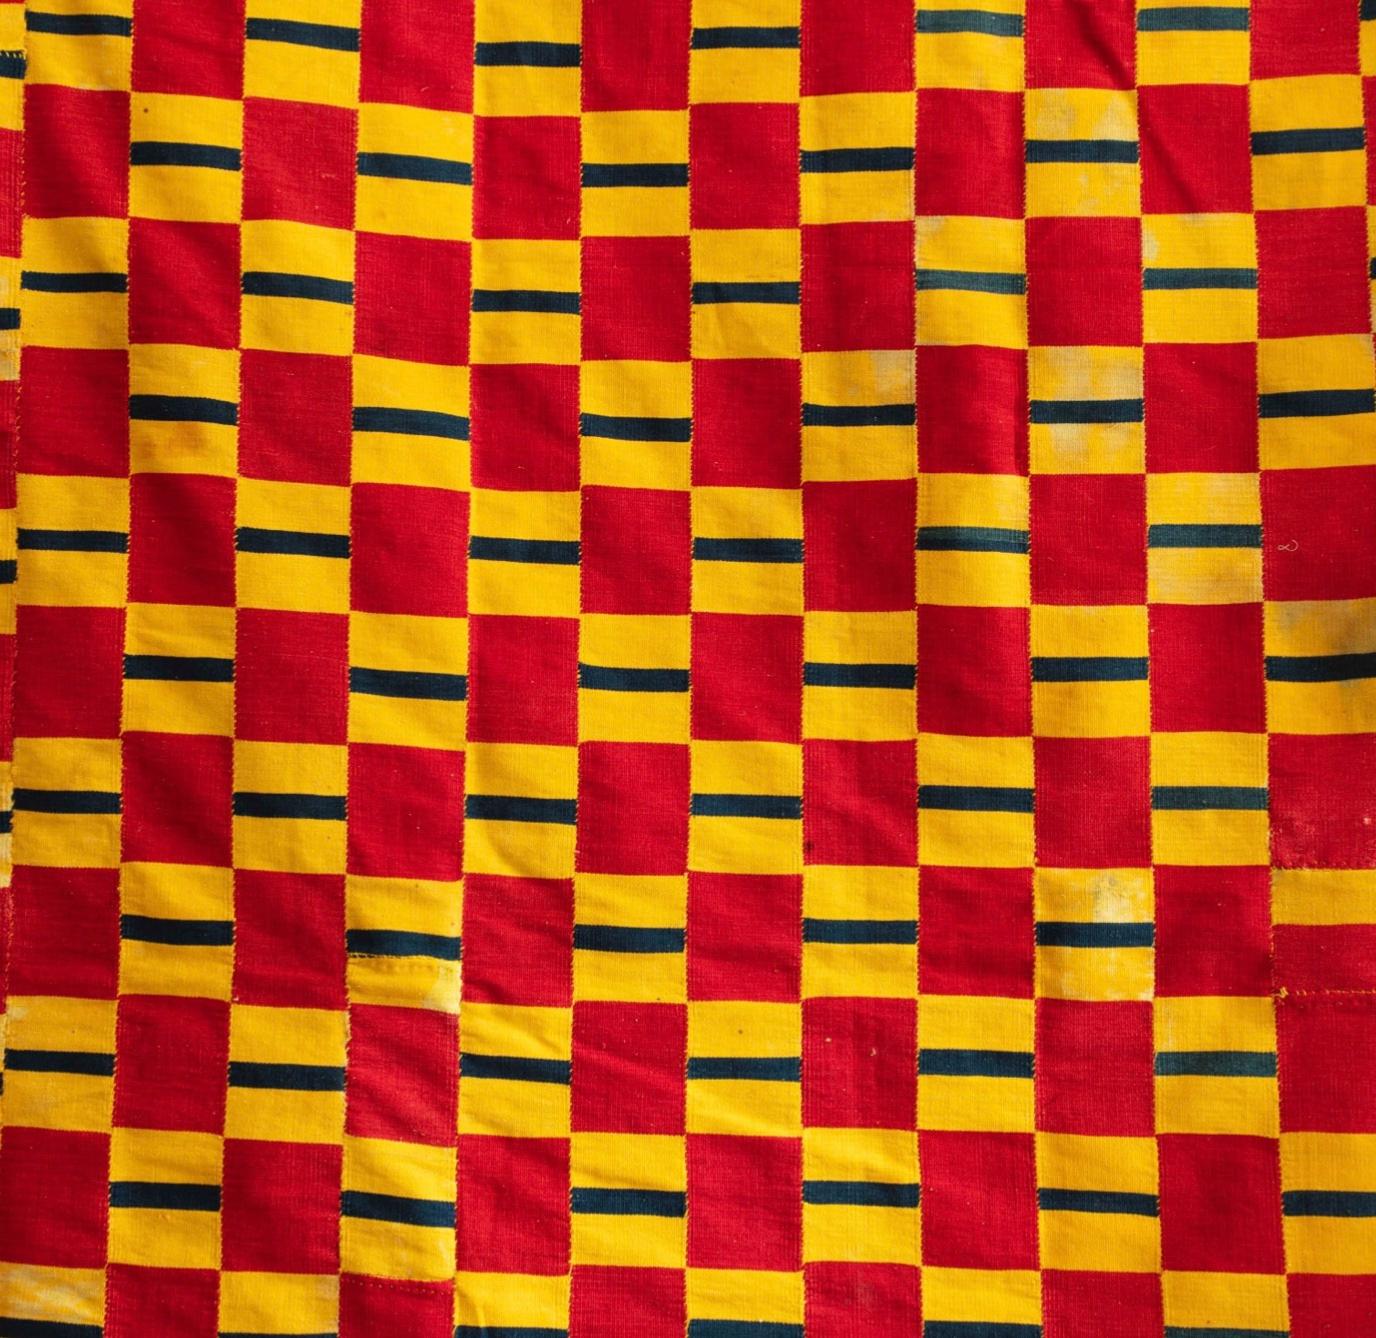 An excellent and very rare Ewe cloth with squares woven in bright red and saffron yellow broken with bands of blue stripes. A notably early cloth comparable to an example in the British Museum Coll. 

No. Af1954,01.1 collected in Dahomey c. 1865,